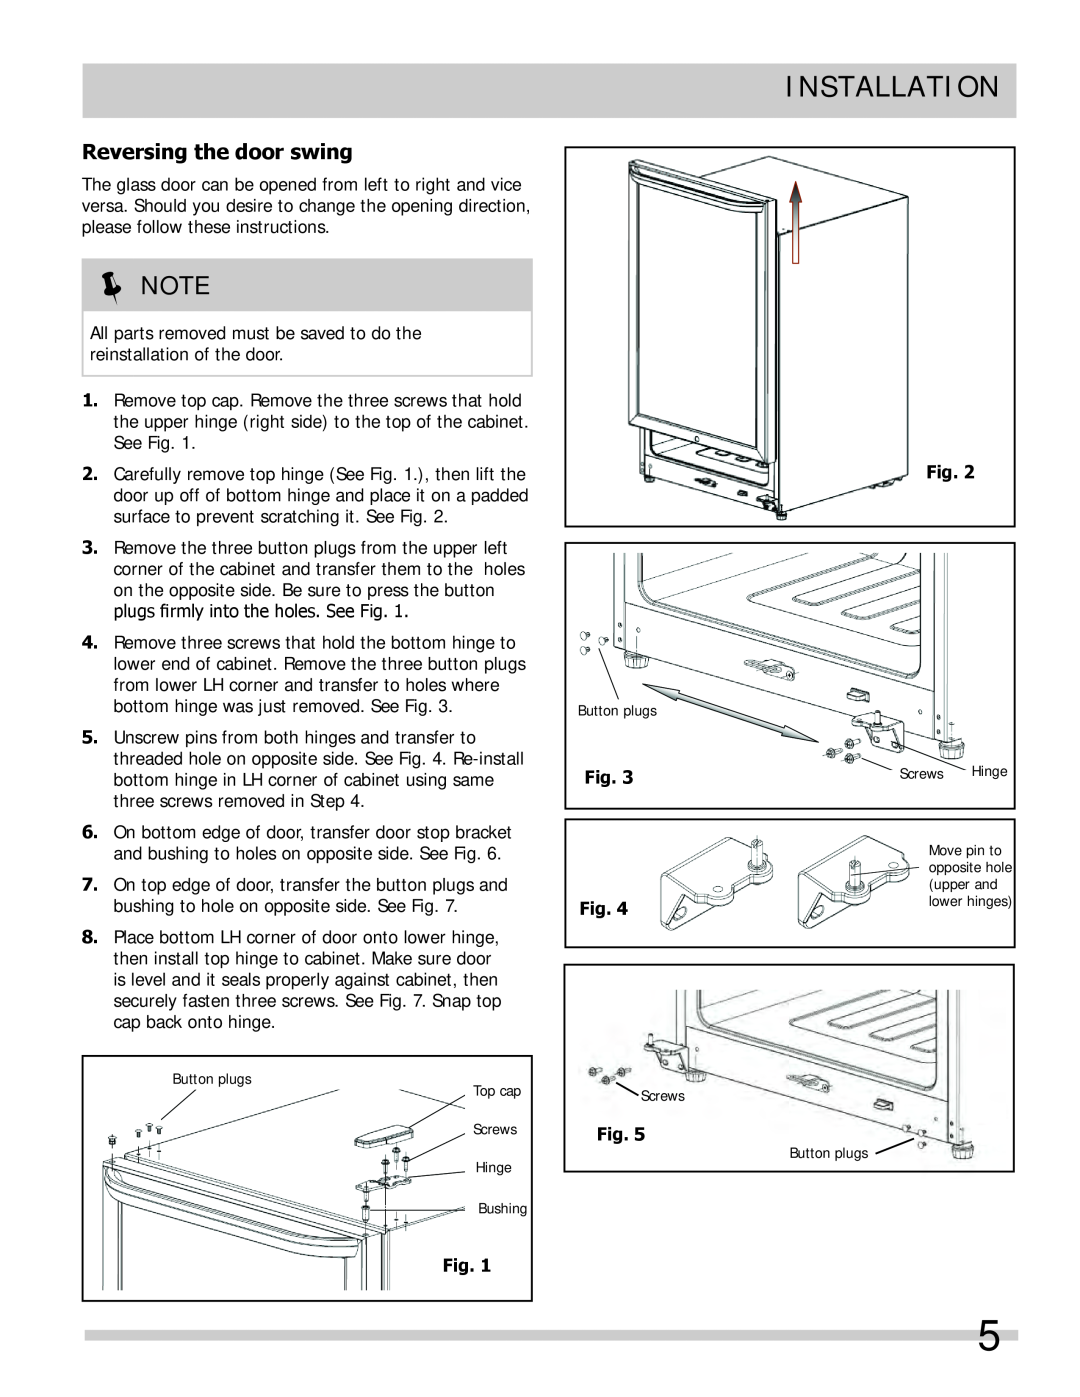 Frigidaire FFWC38F6LS, FFWC42F5LS important safety instructions Installation, Reversing the door swing,  Note 